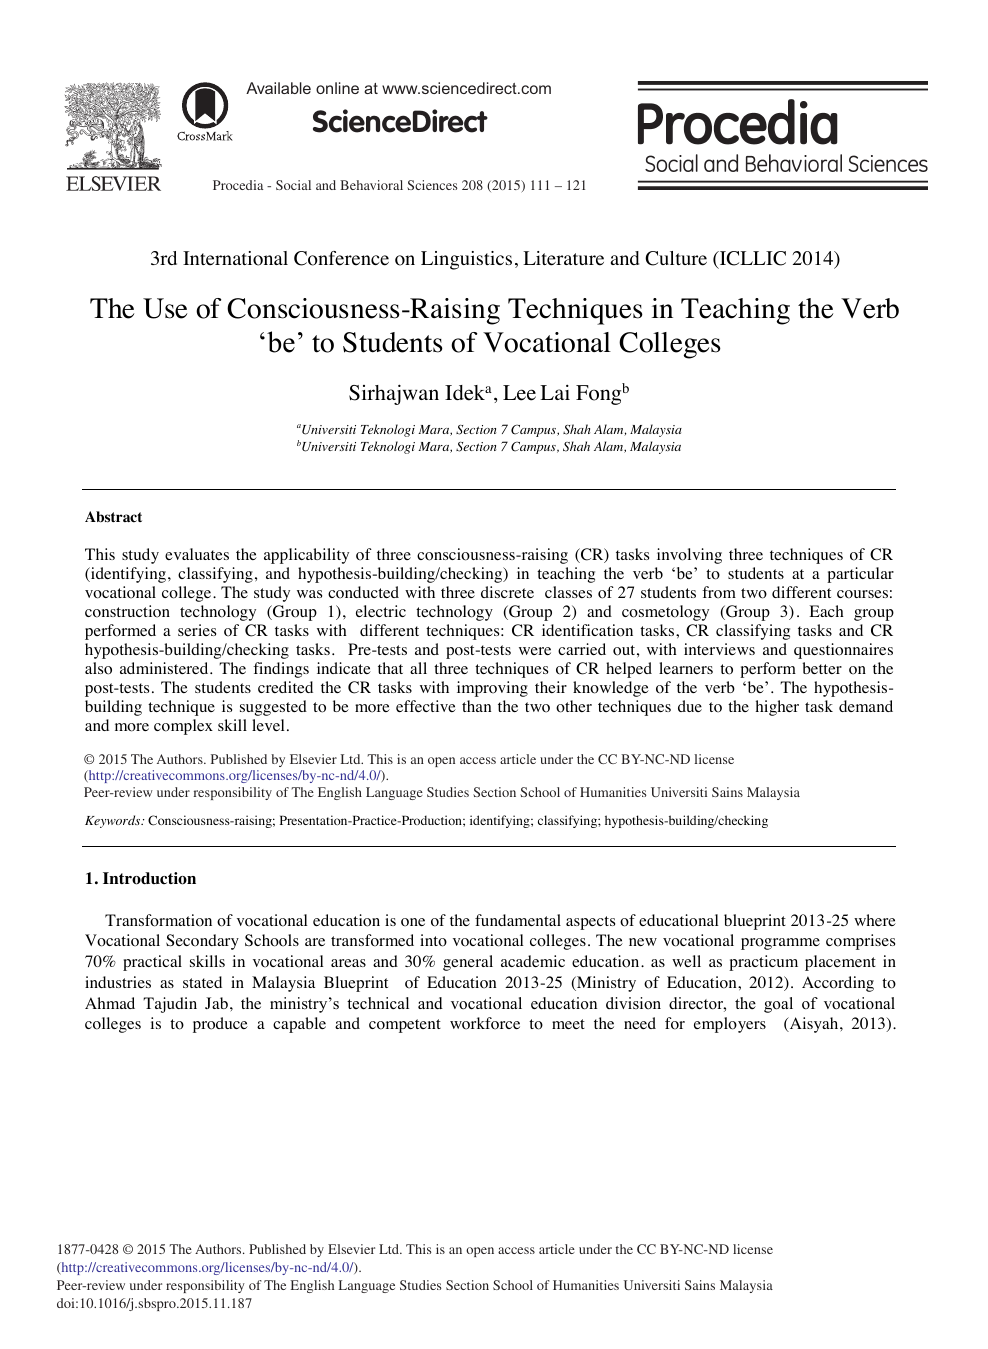 The Use Of Consciousness Raising Techniques In Teaching The Verb Be To Students Of Vocational Colleges Topic Of Research Paper In Languages And Literature Download Scholarly Article Pdf And Read For Free